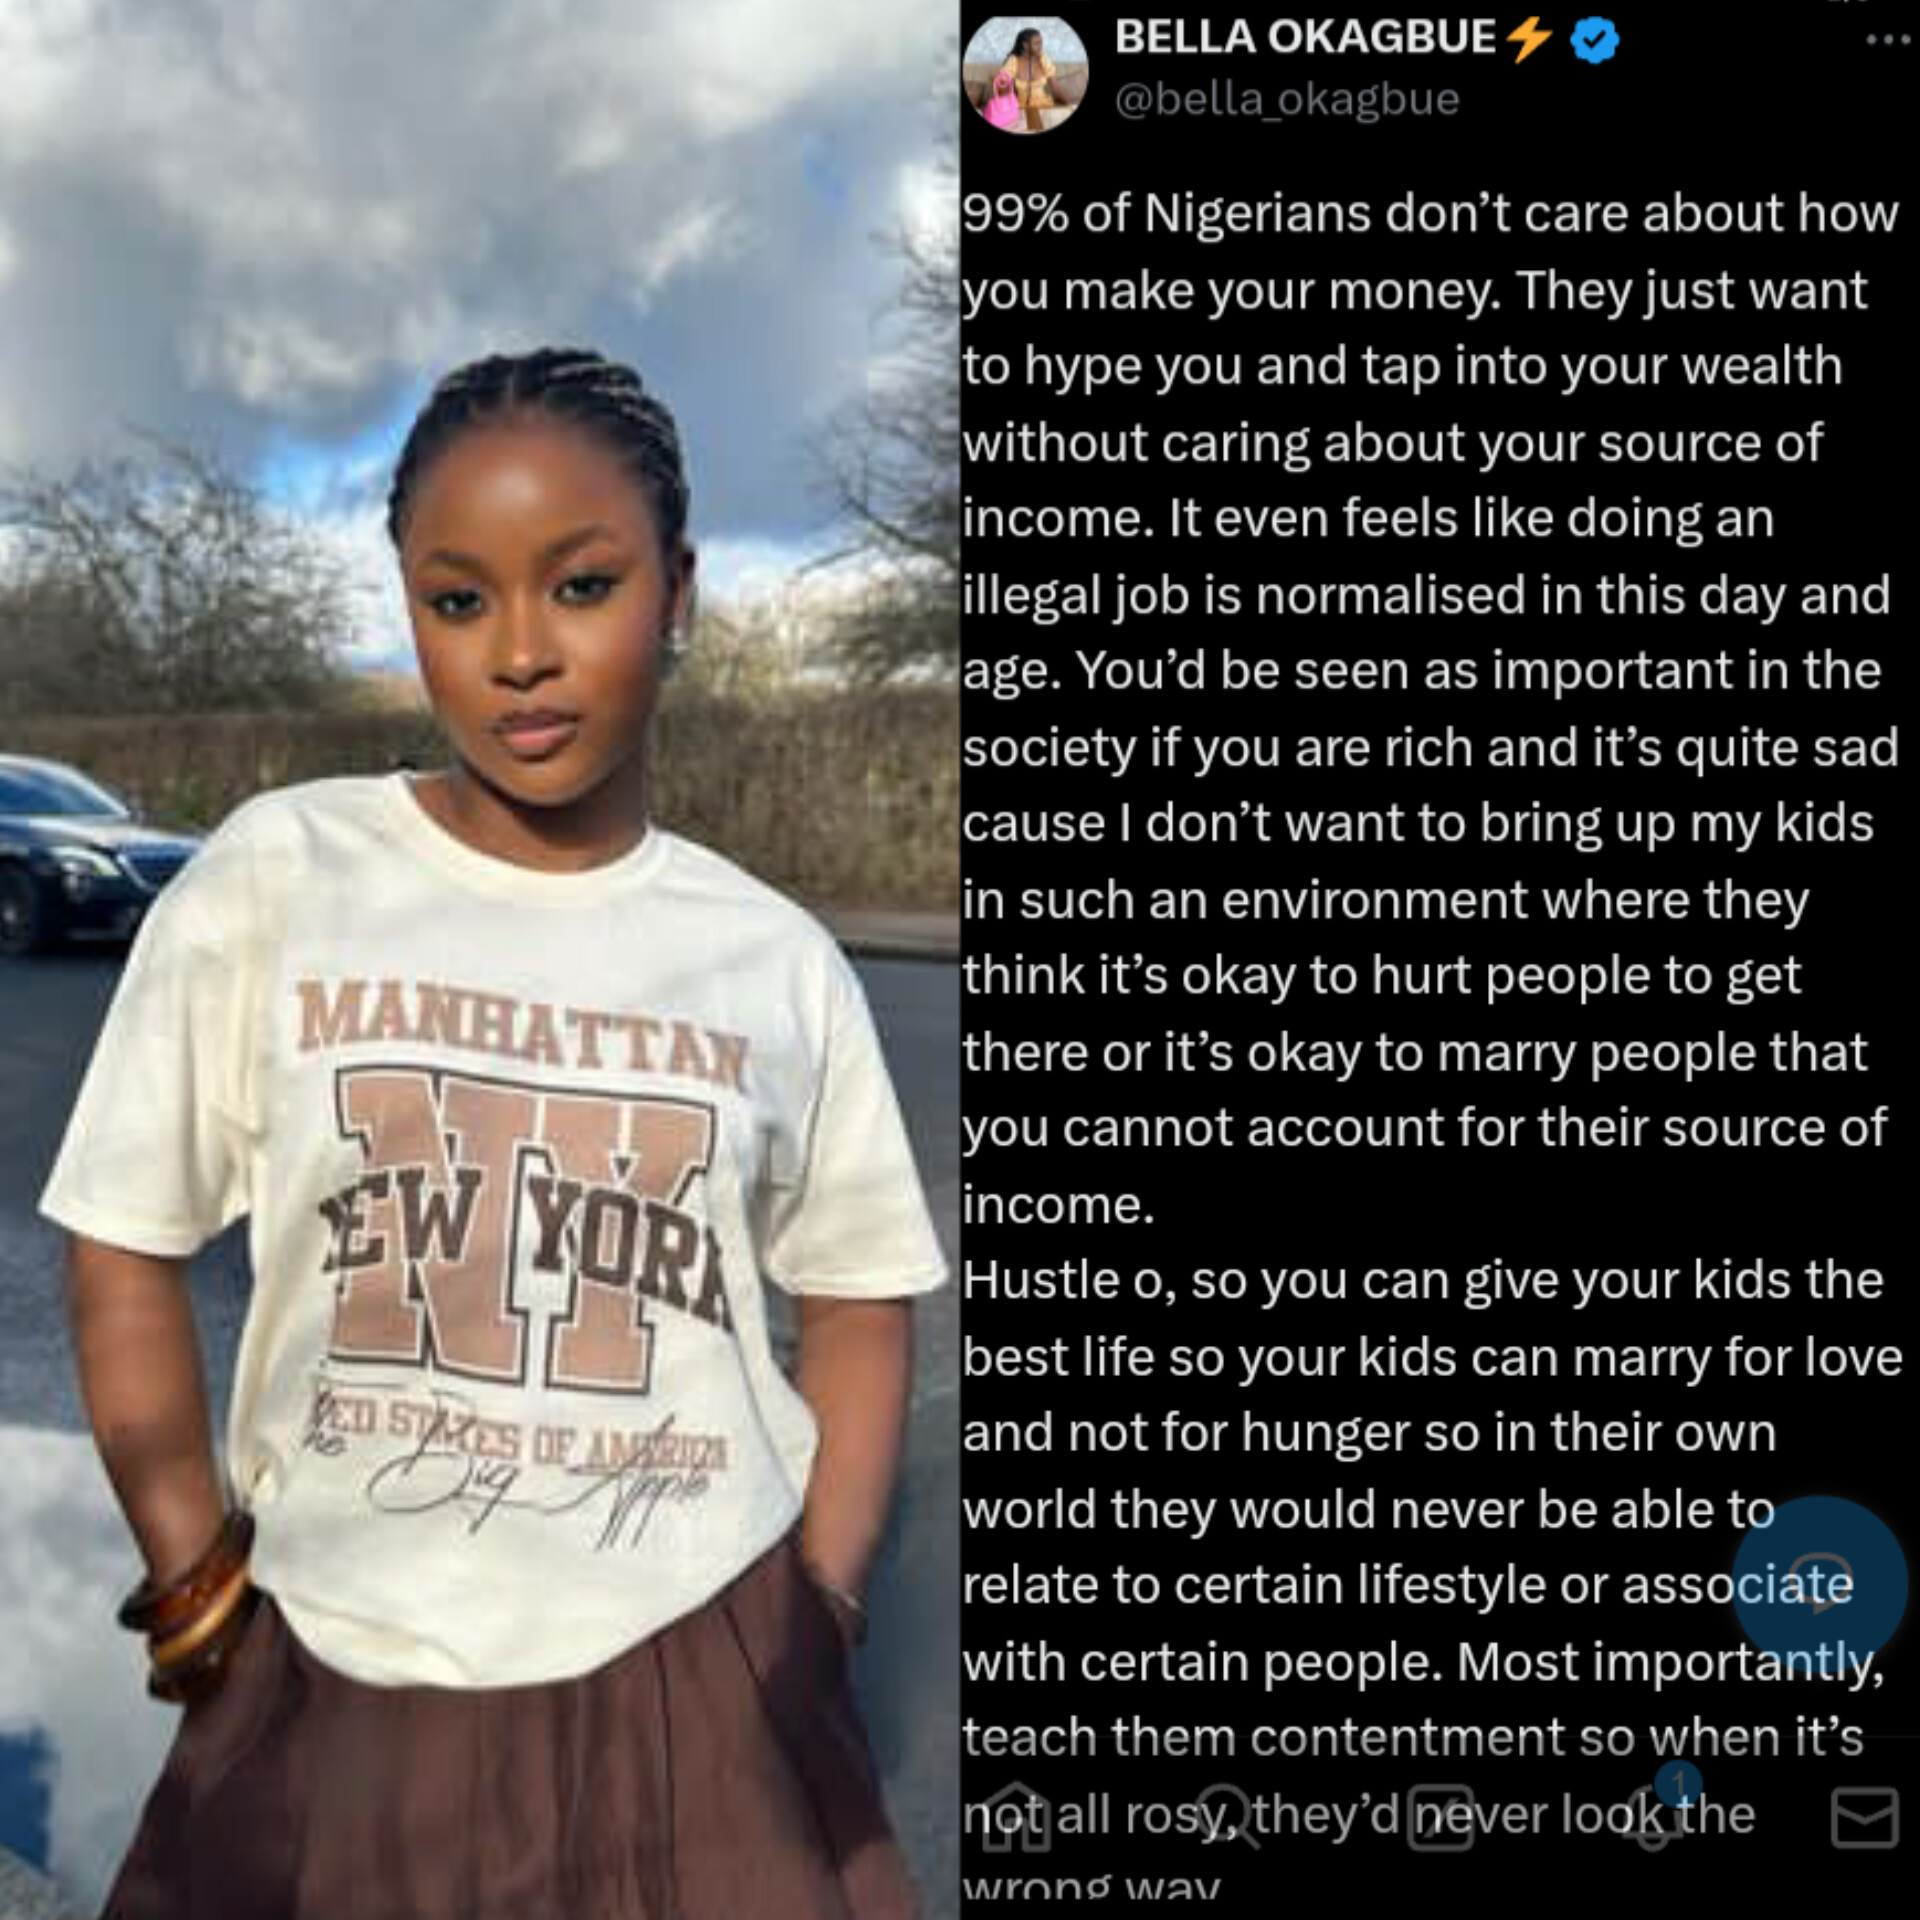 "99% Of Nigerians Don't Care About How You Make Your Money They Just Want To Tap Into Your Wealth. You'll Be Seen As Important If Your Rich" — Bella Okagbue Says, Gives Advises To Nigerians